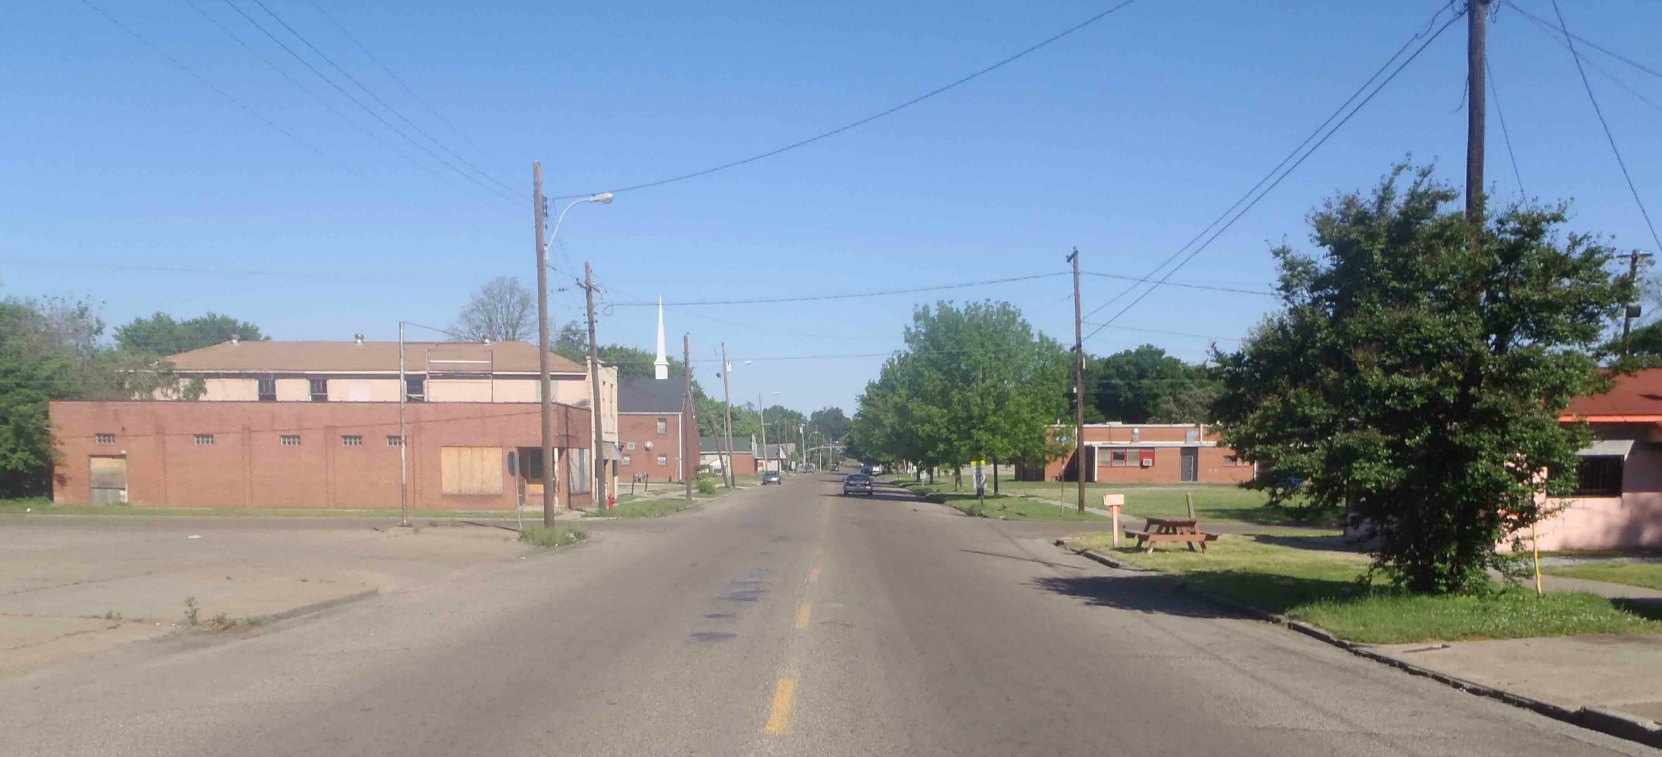 Nelson Street, Greenville, Mississippi, as seen from the Mississippi Blues Trail marker